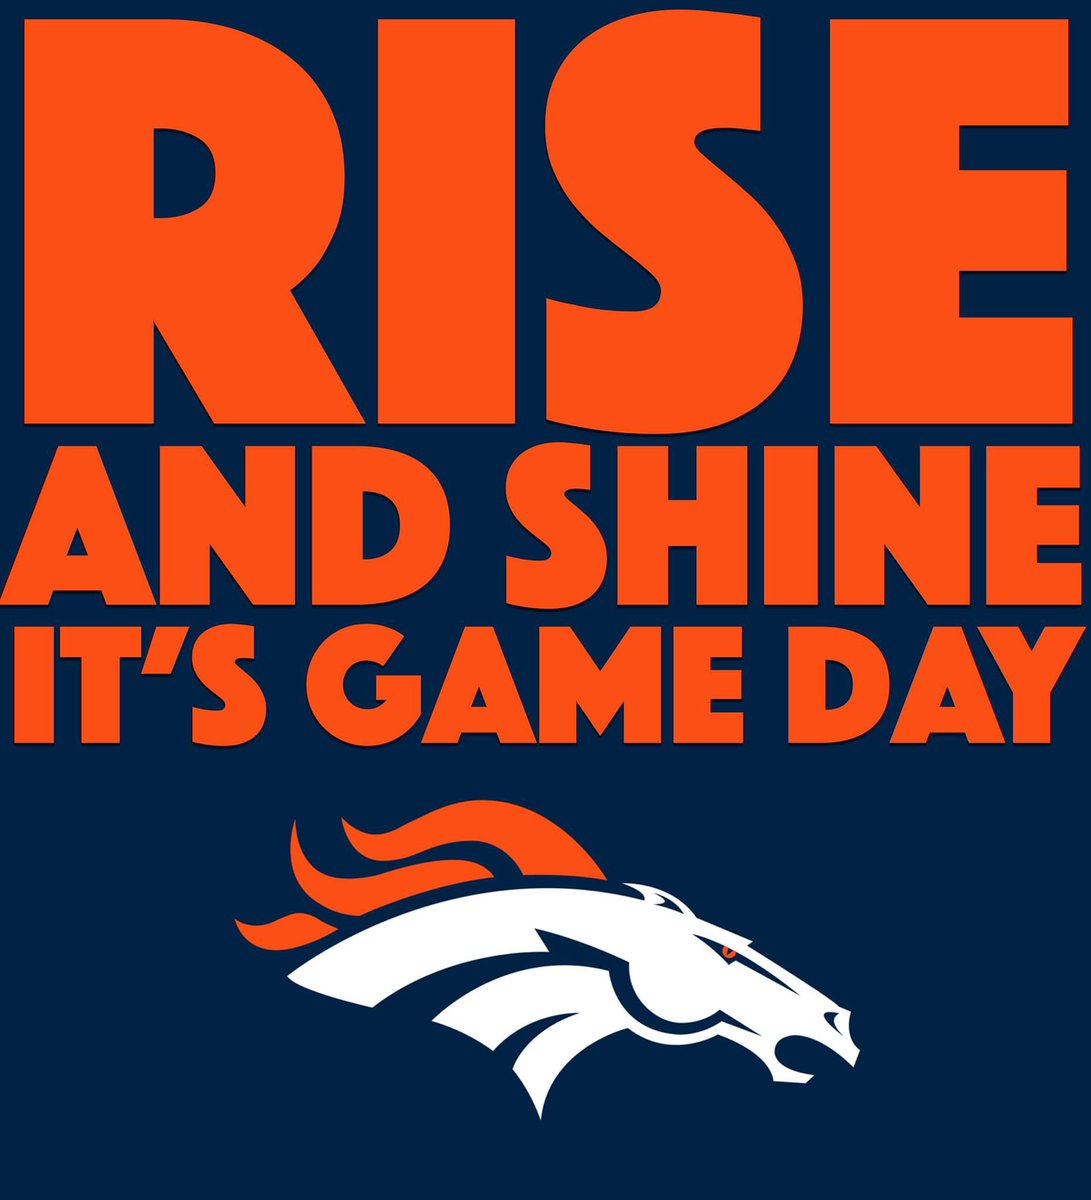 It's gameday! Final game of a very disappointing season for the @Broncos so let's go out in style with a victory over the chargers.  #BroncosCountry #UnitedInOrange